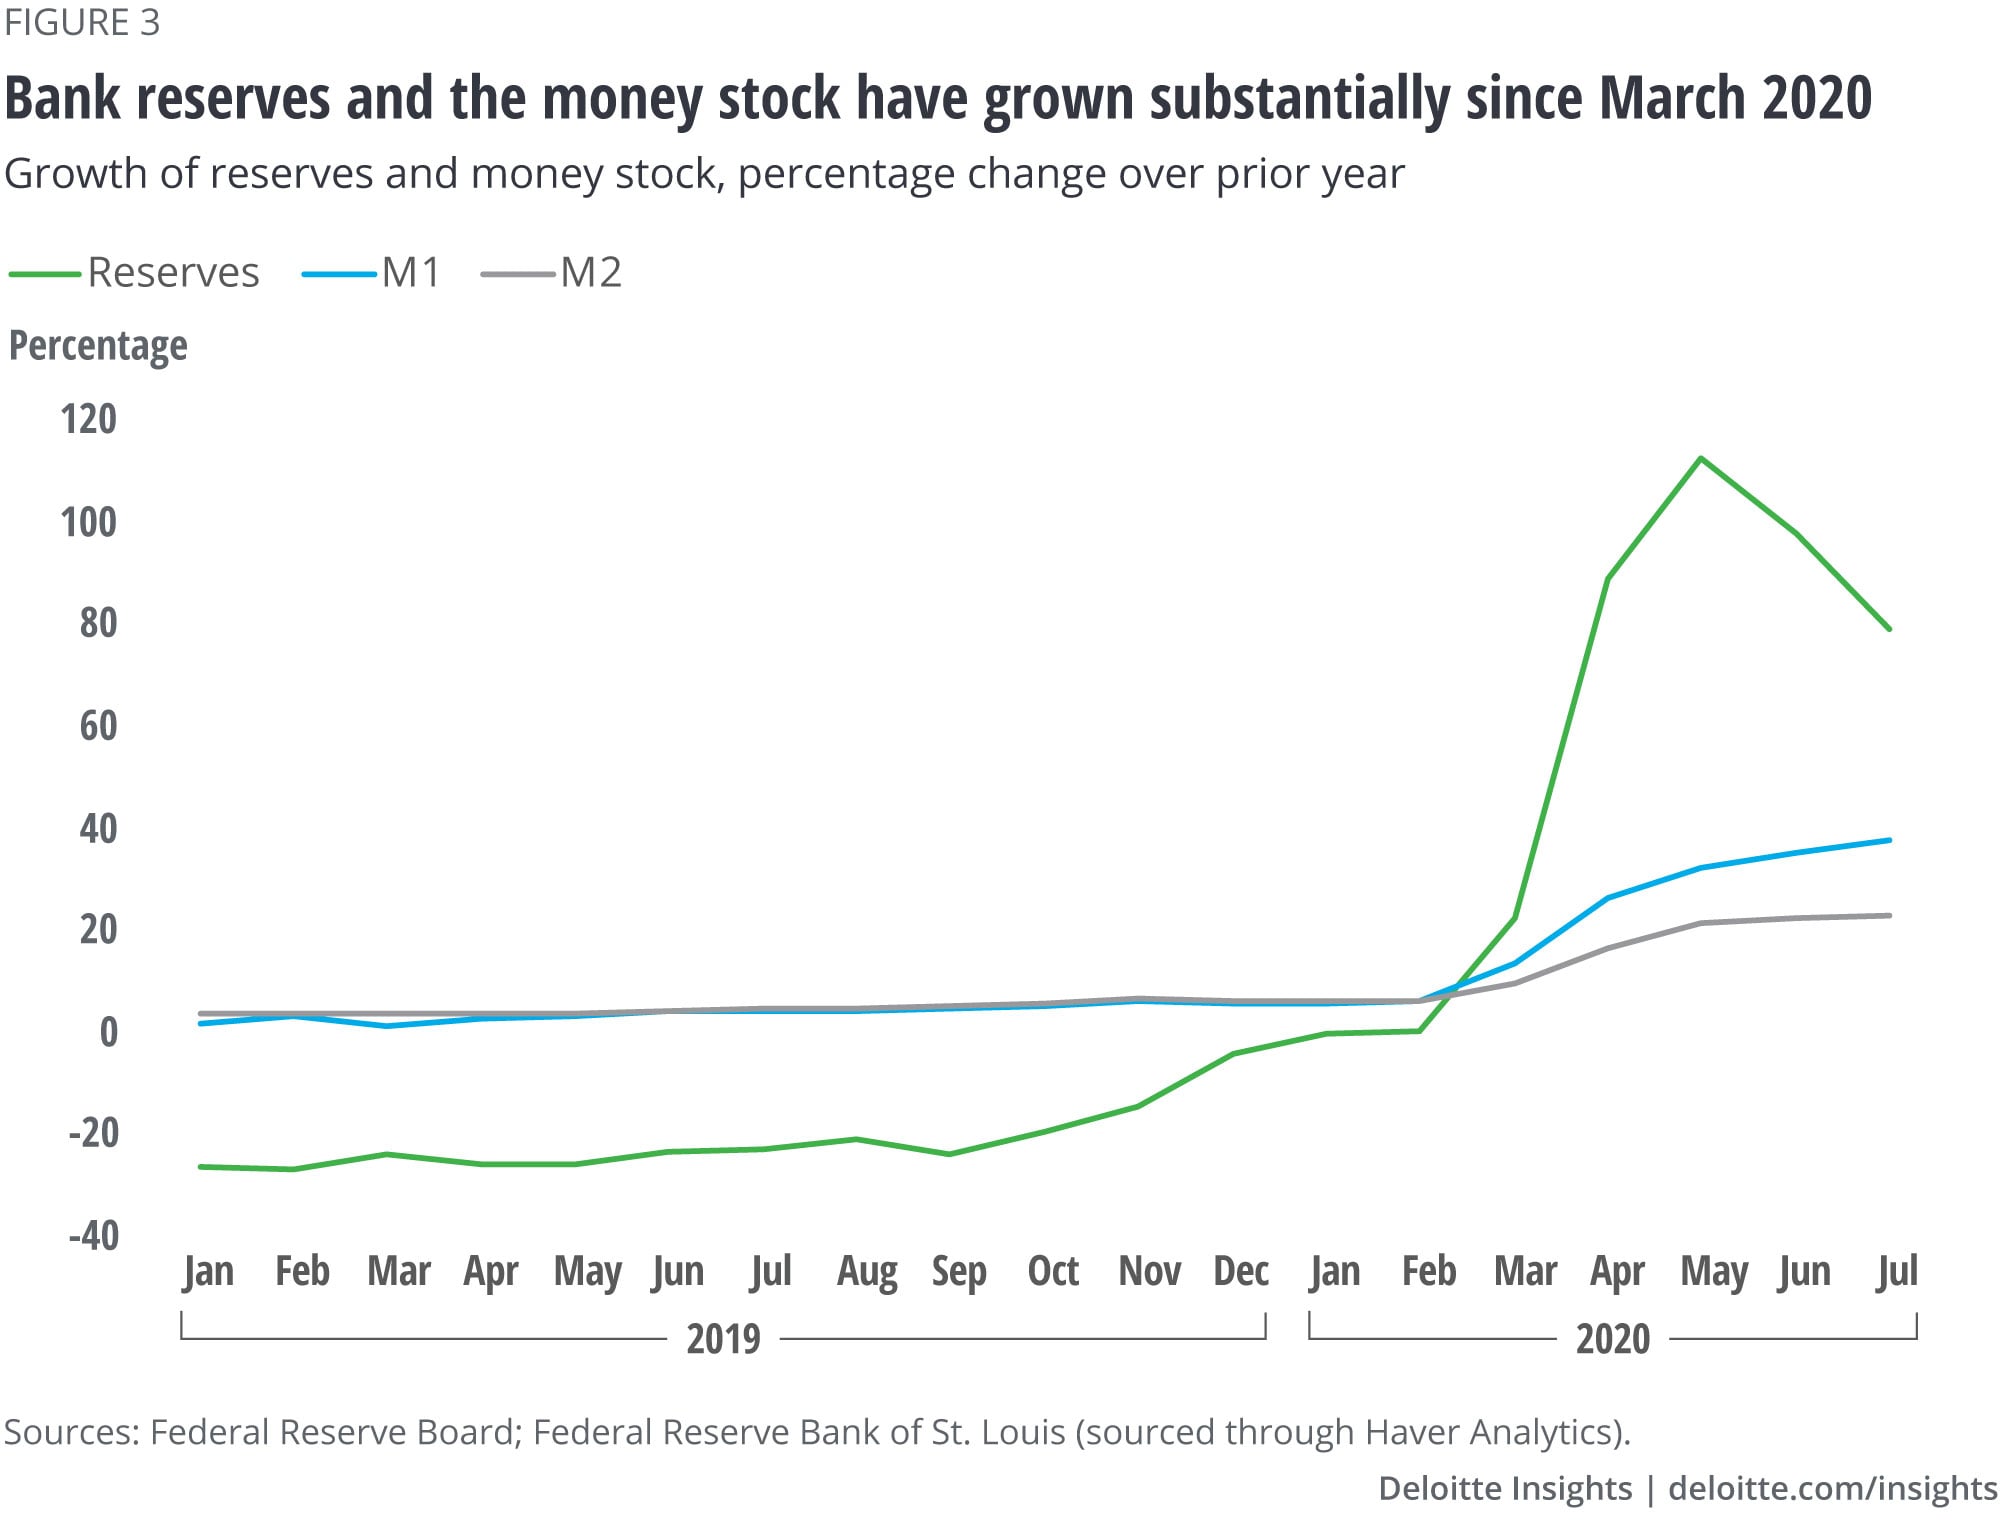 Bank reserves and the money stock have grown substantially since March 2020